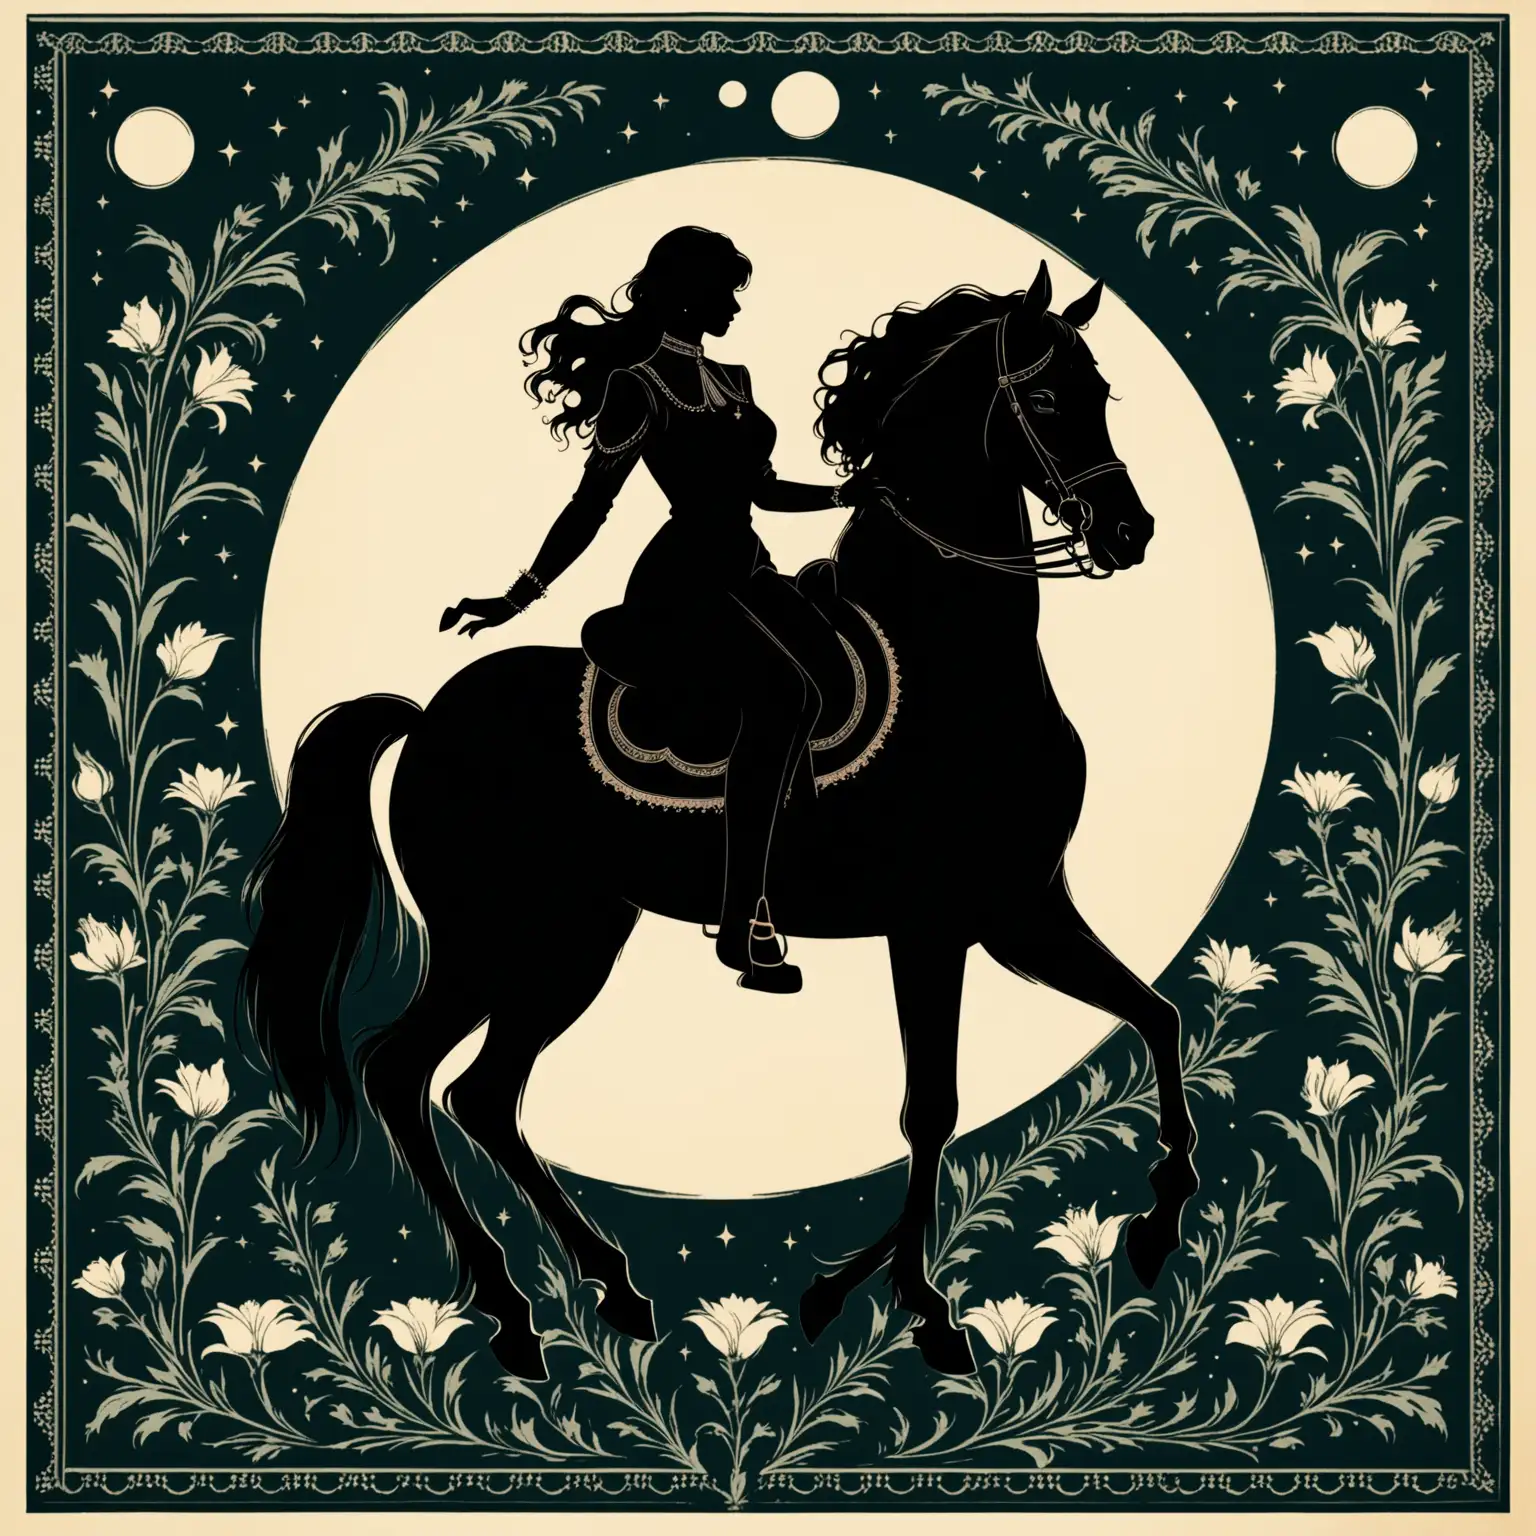 Vintage Illustration,  Art Deco Style, Silhouette of beautiful Arabic horse, Moon in Background, Dark Academia Aesthetic, Full Body portrait, Victorian-Inspired, Tapestry-Like, Dark Muted Colors, Flowercore